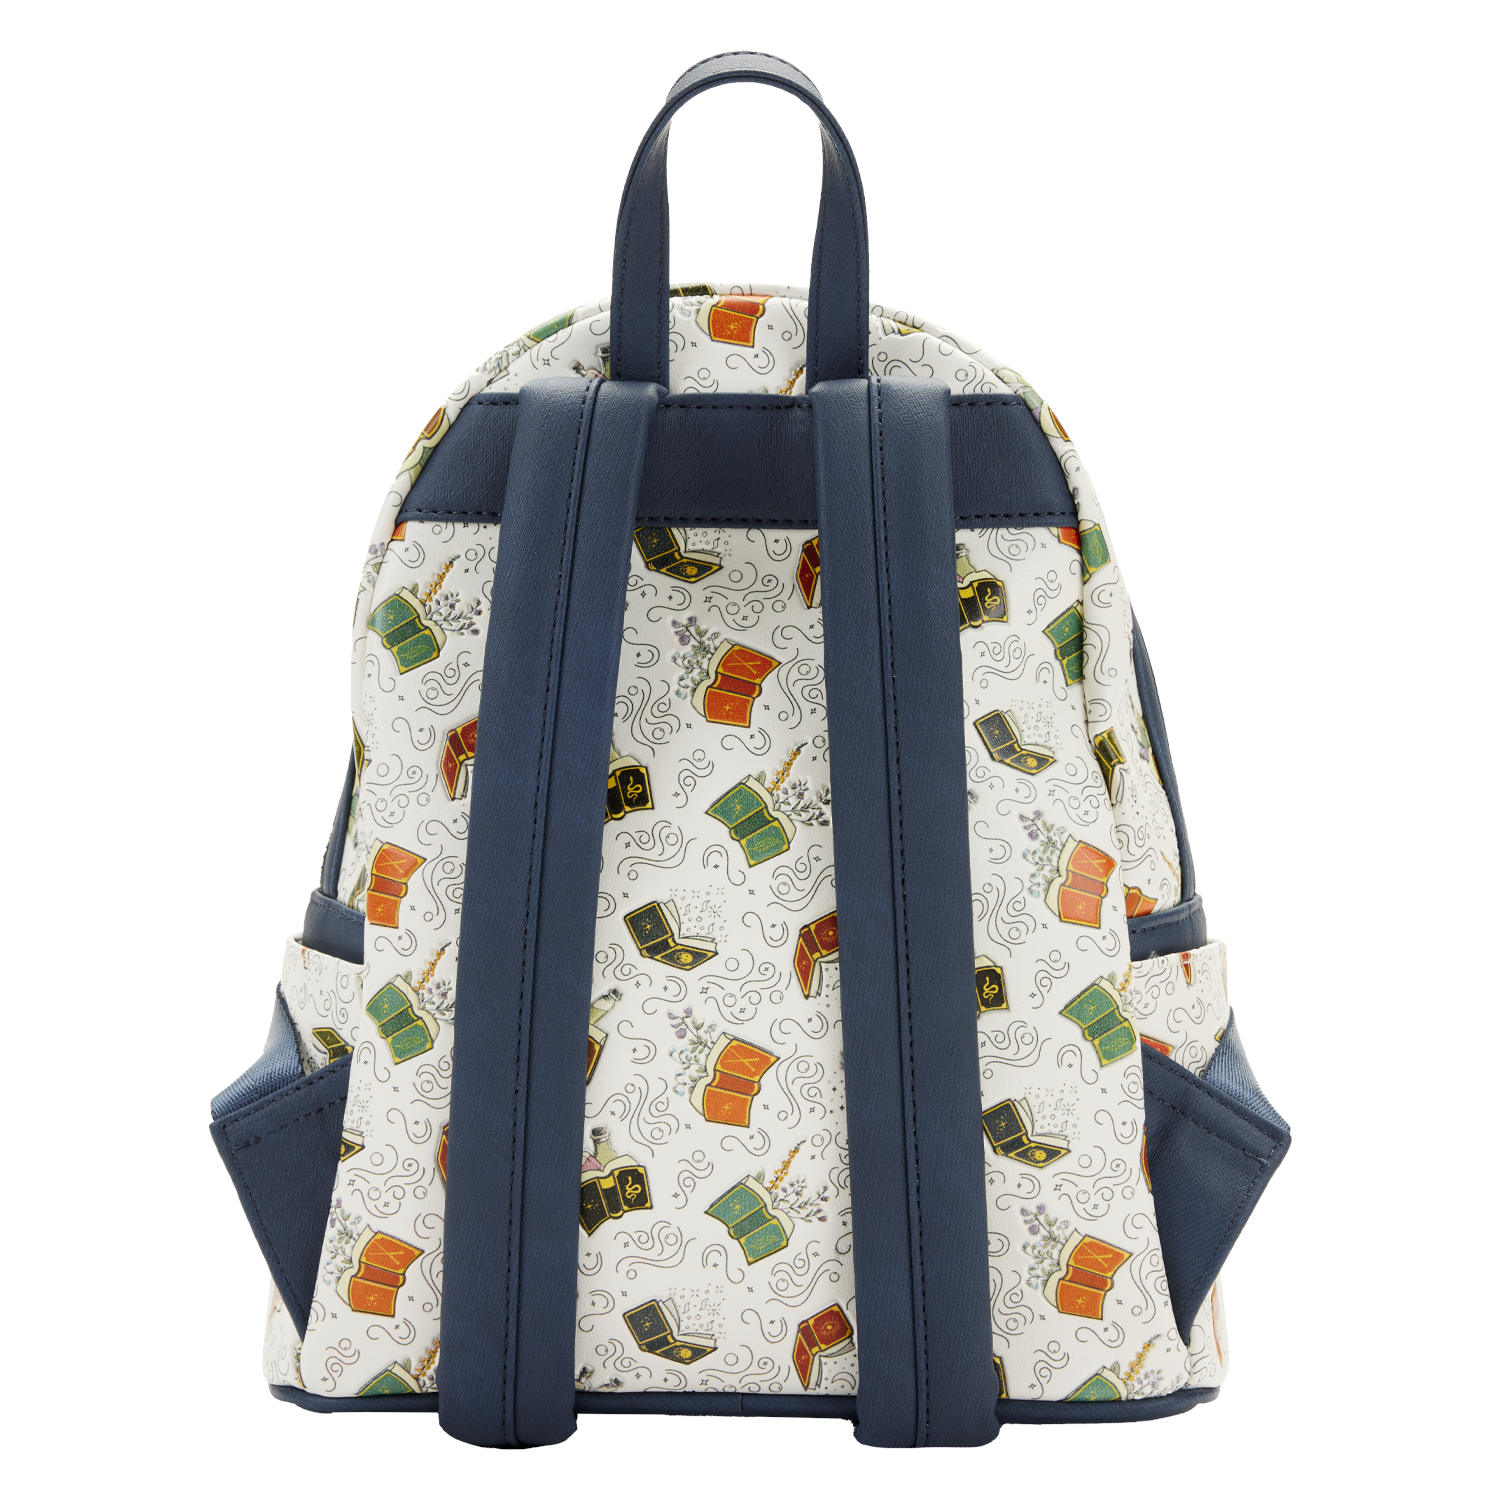 The Fantastic Beasts Magical Mini Backpack is covered in a magical print and includes two sturdy straps.